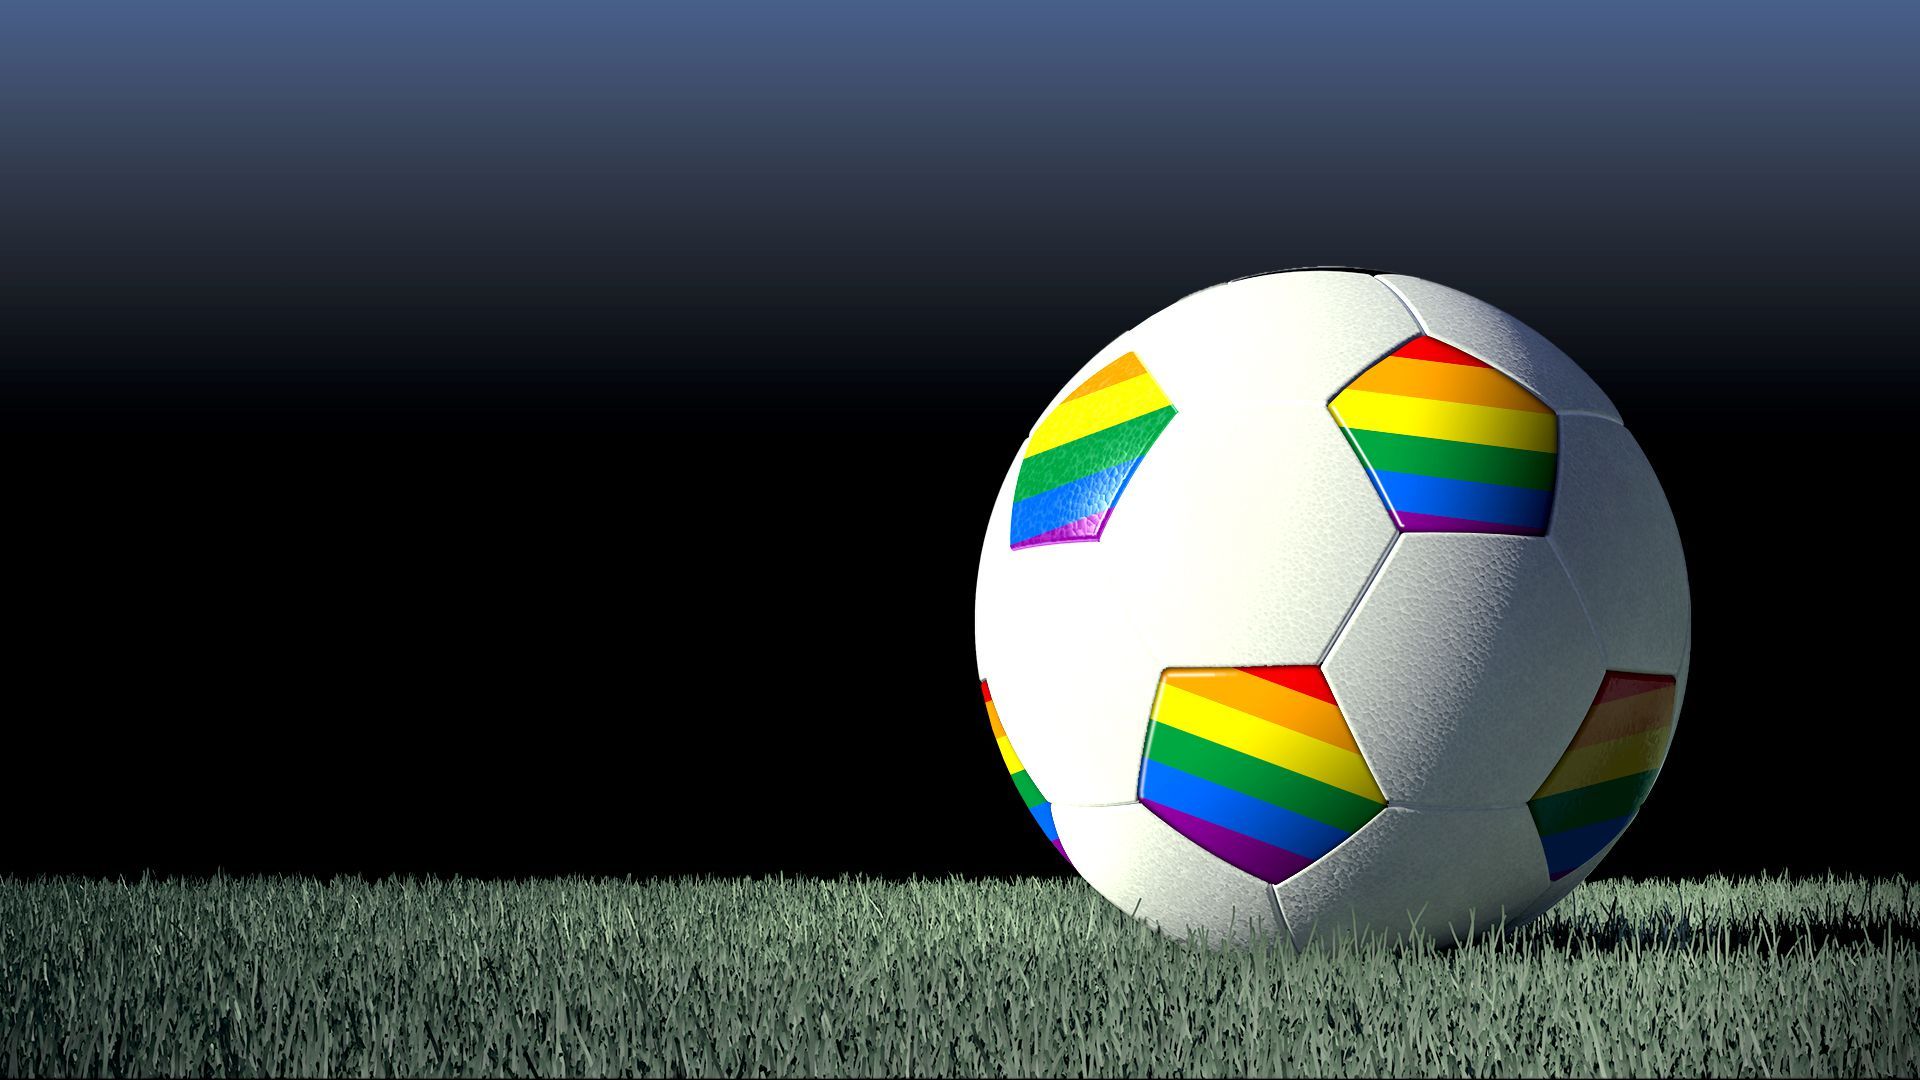 Illustration of a soccer ball with pride flag patterns repeated throughout the ball